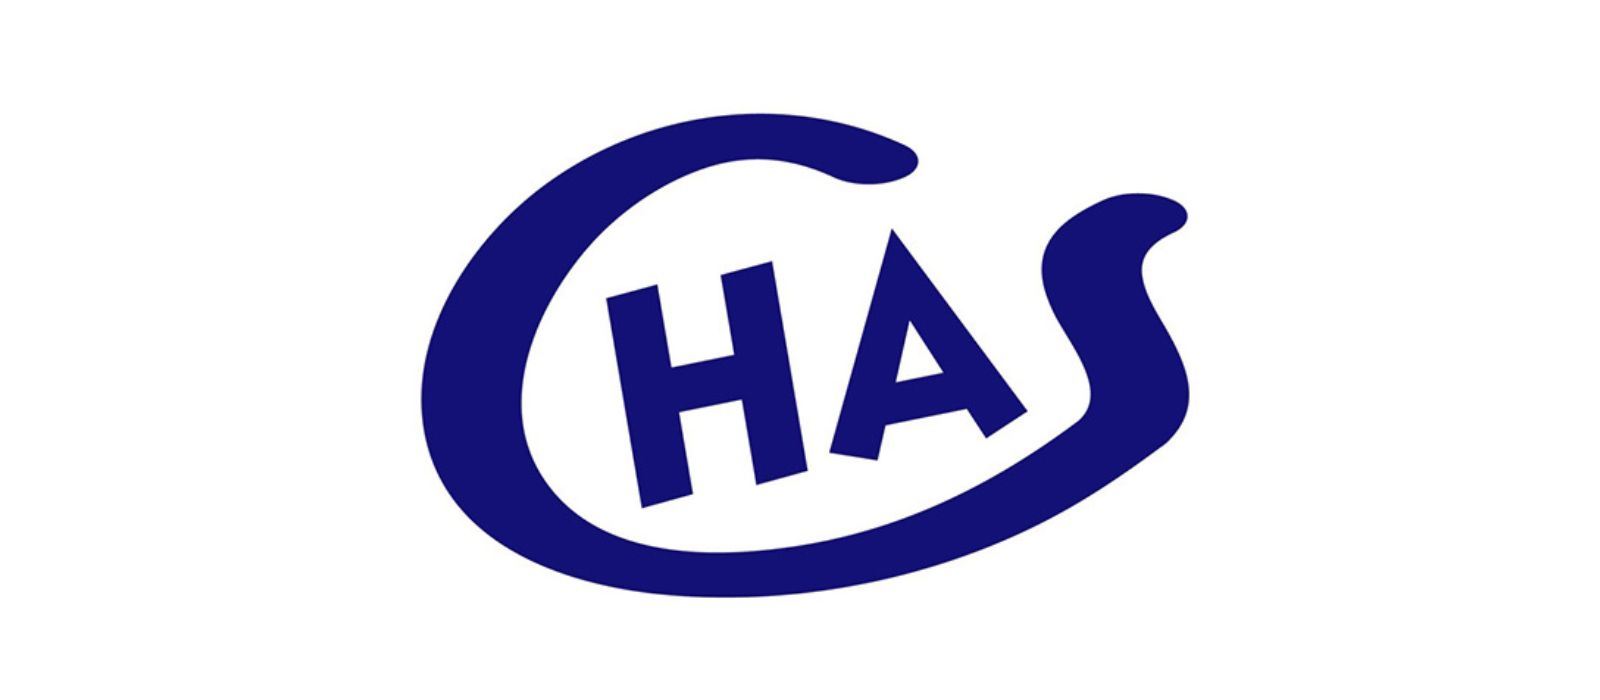 Transwaste Get Chas Accredited